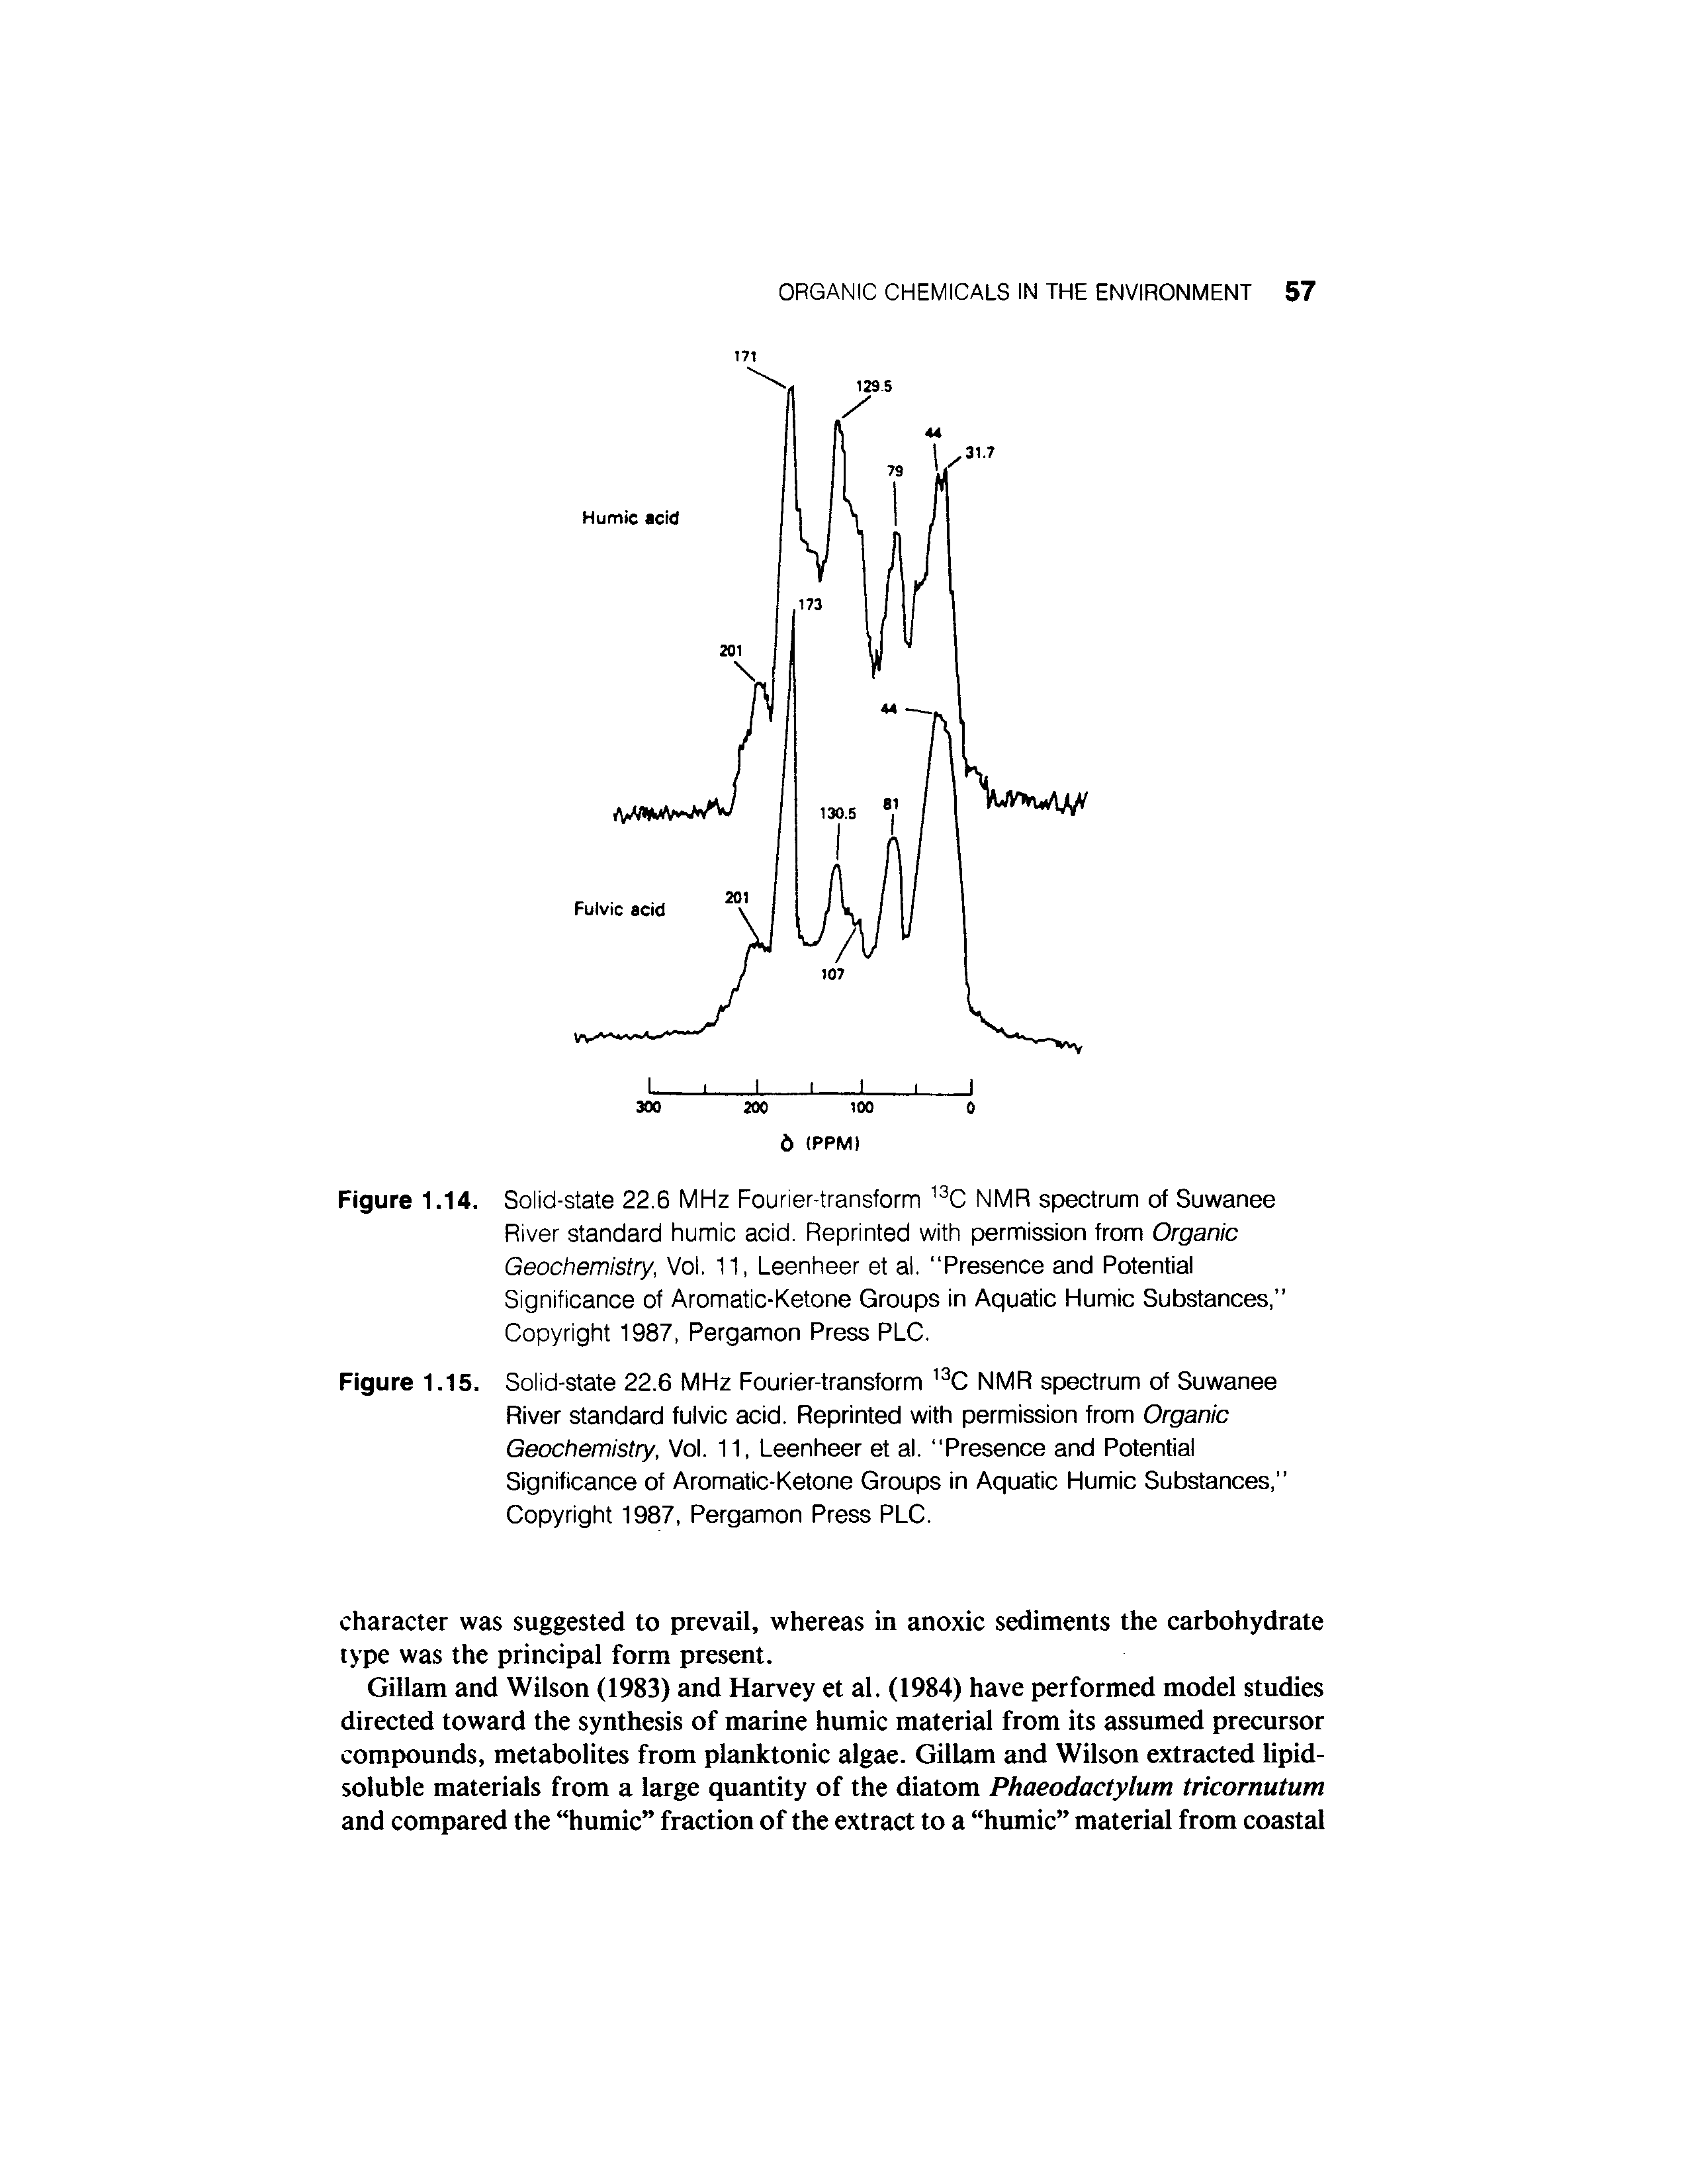 Figure 1.14. Solid-state 22.6 MHz Fourier-transform NMR spectrum of Suwanee River standard humic acid. Reprinted with permission from Organic Geochemistry, Vol. 11, Leenheer et al. Presence and Potential Significance of Aromatic-Ketone Groups in Aquatic Humic Substances, Copyright 1987, Pergamon Press PLC.